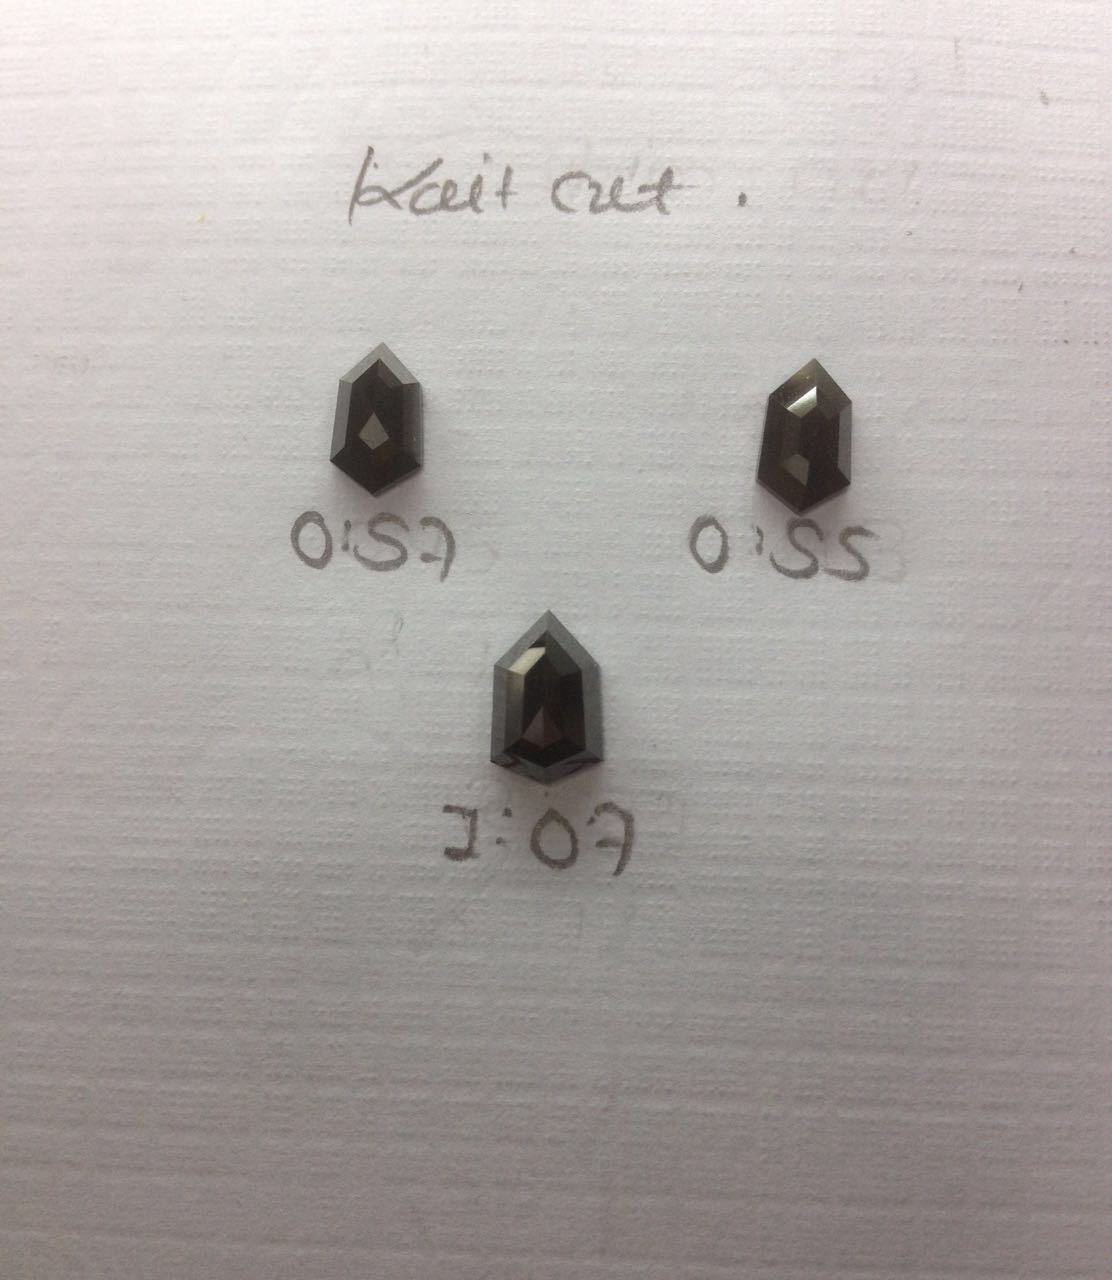 Black cotted Treated Diamonds